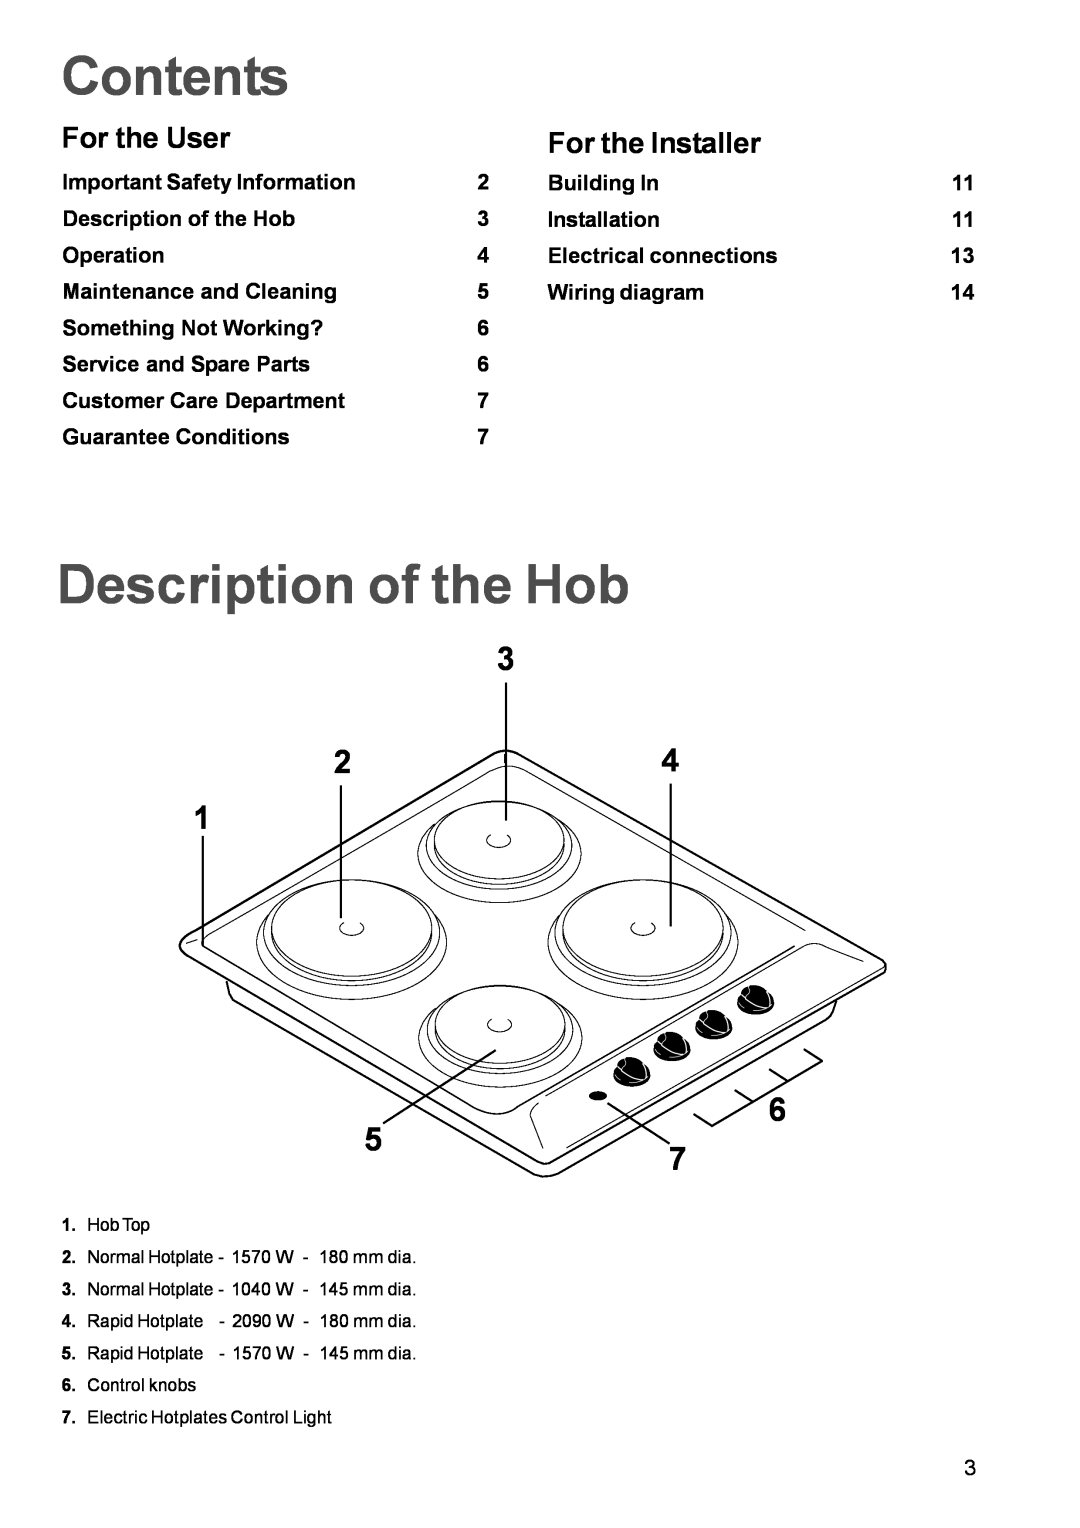 Zanussi ZEL 63 manual Contents, Description of the Hob, For the User, For the Installer 